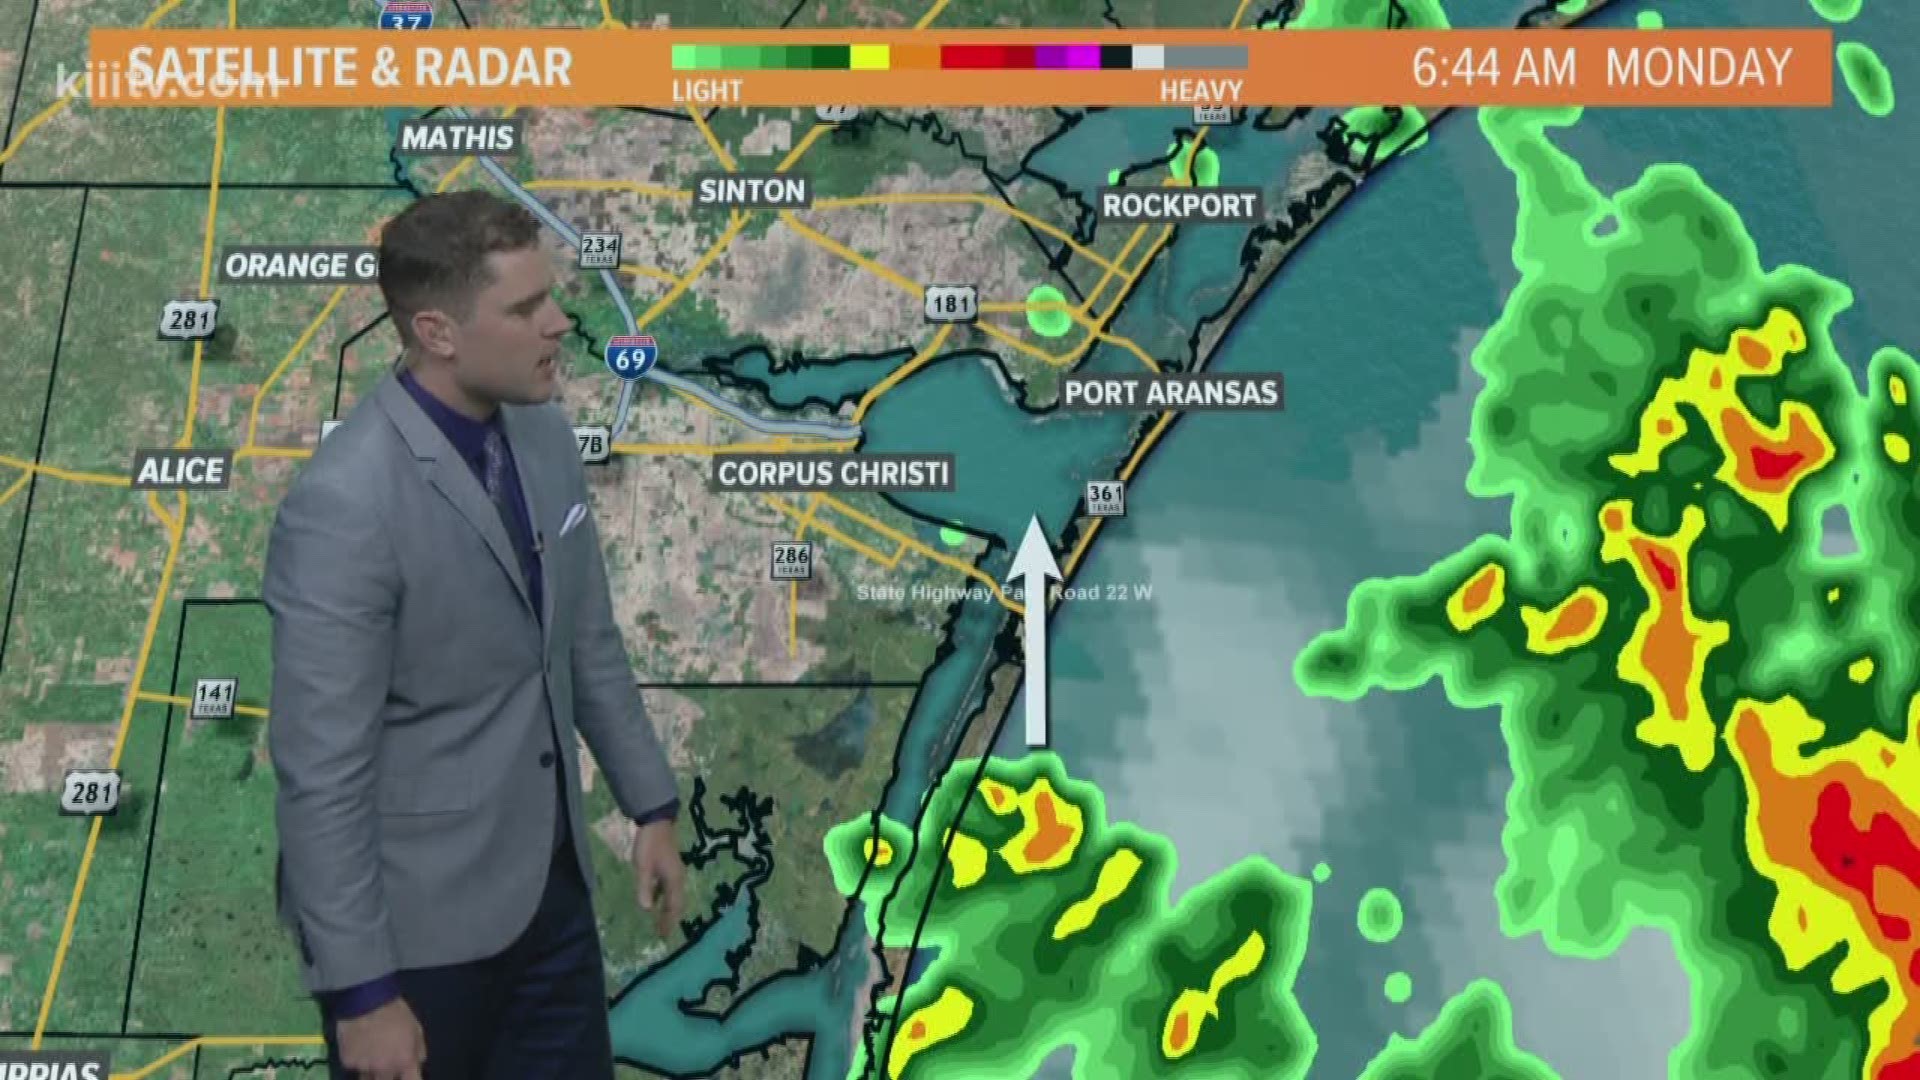 Heavy downpours likely through Wednesday